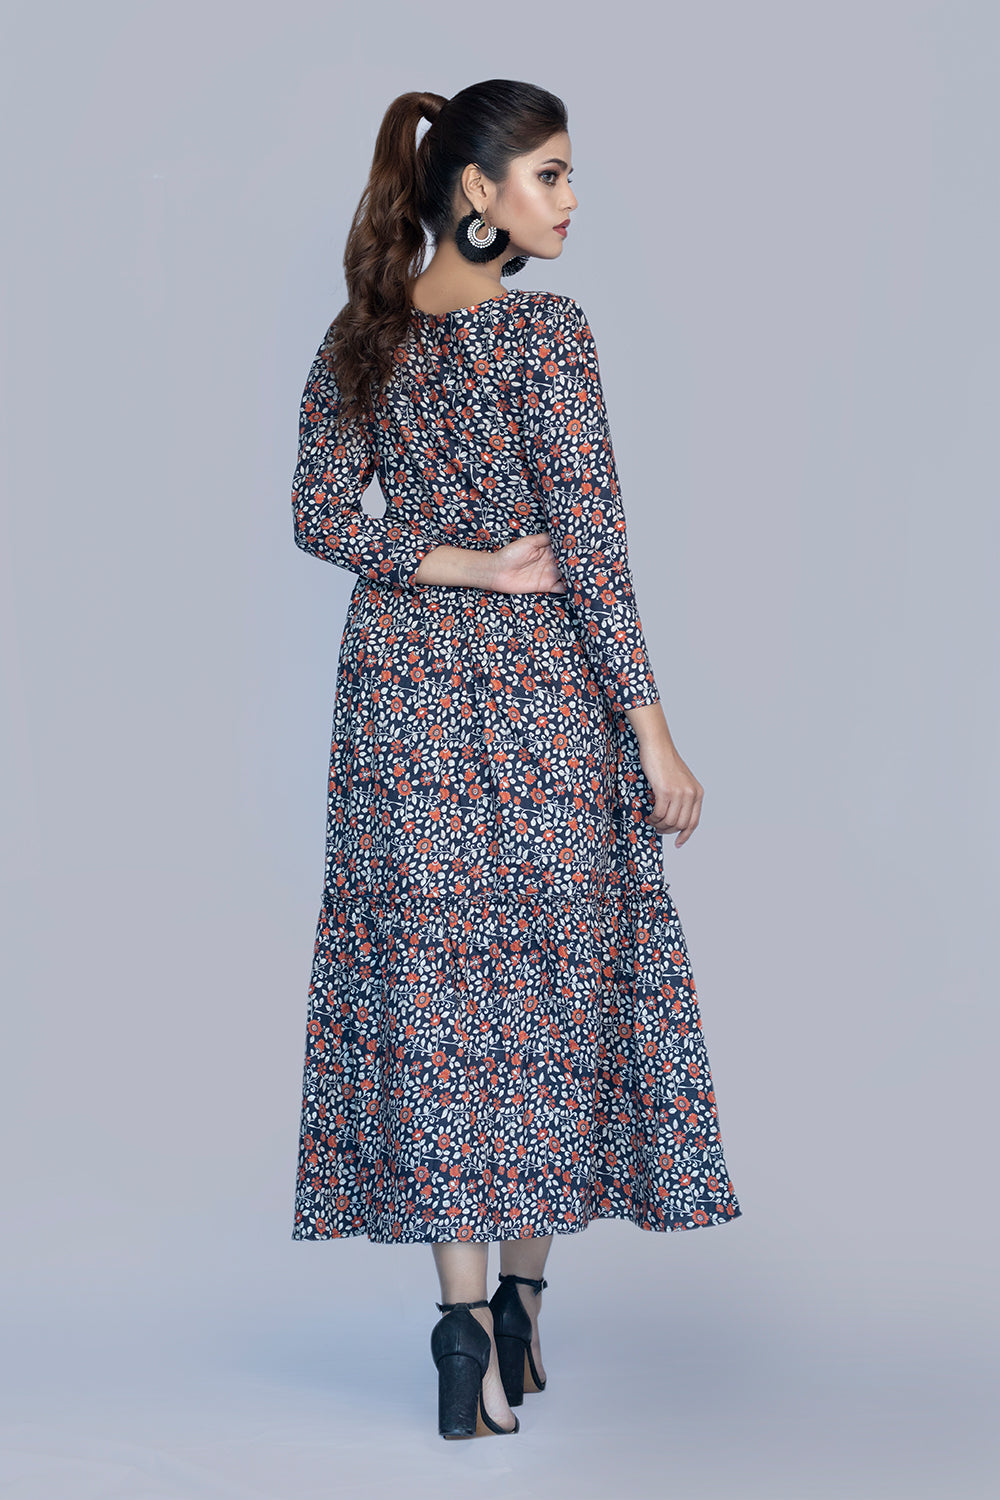 Ethnic Floral Rush By Bareeq